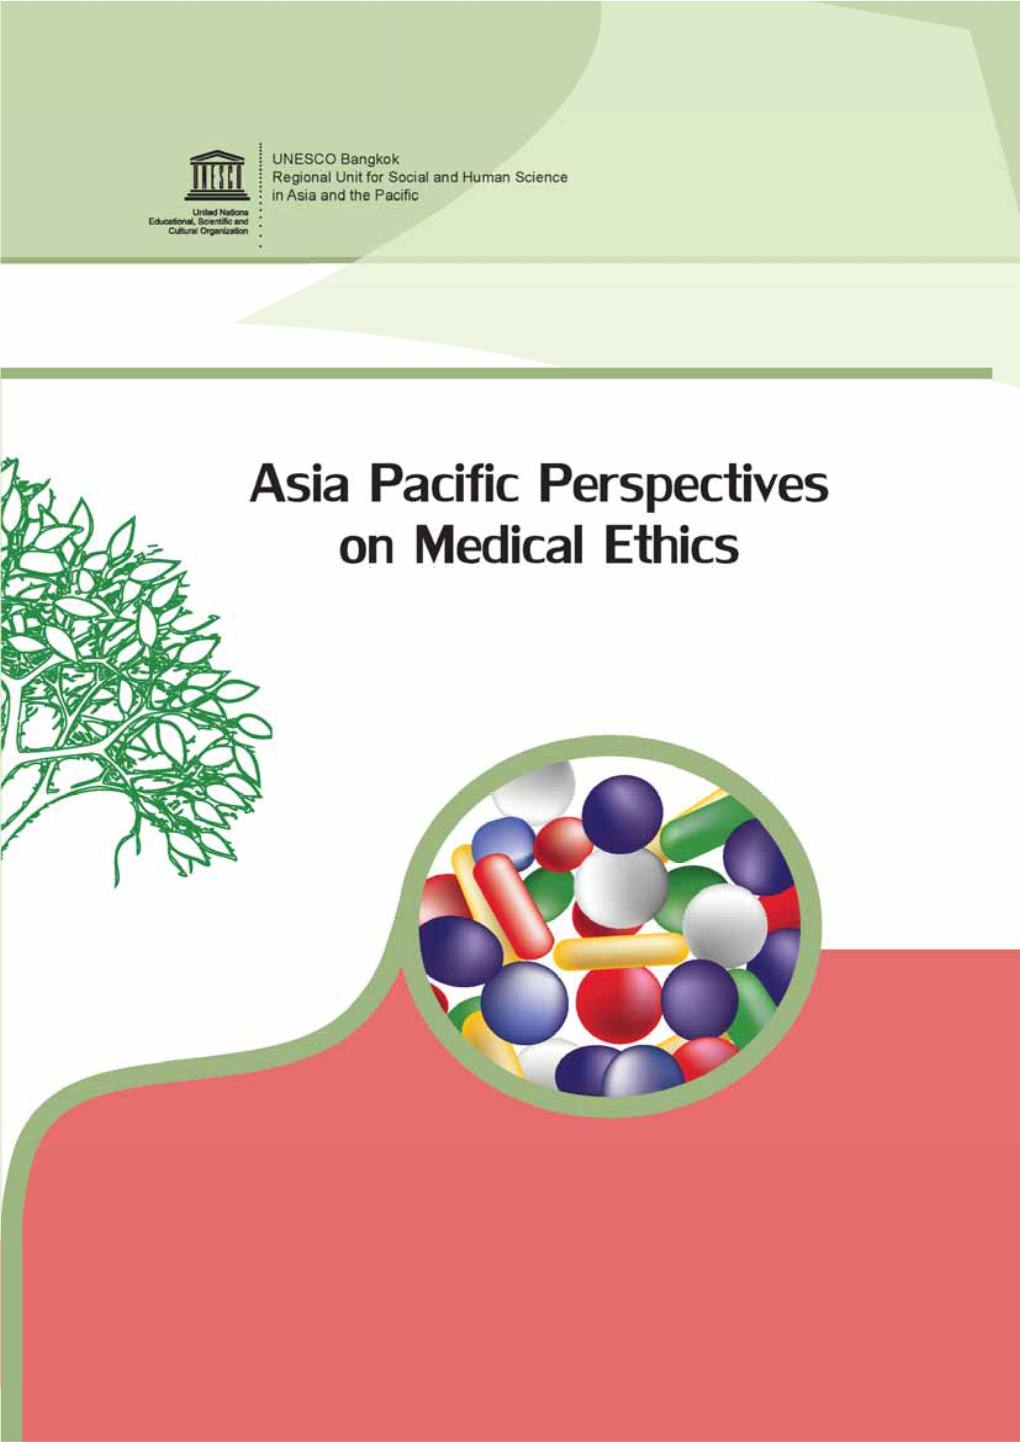 Asia-Pacific Perspectives on Medical Ethics Asia-Pacific Perspectives on the Medical Ethics